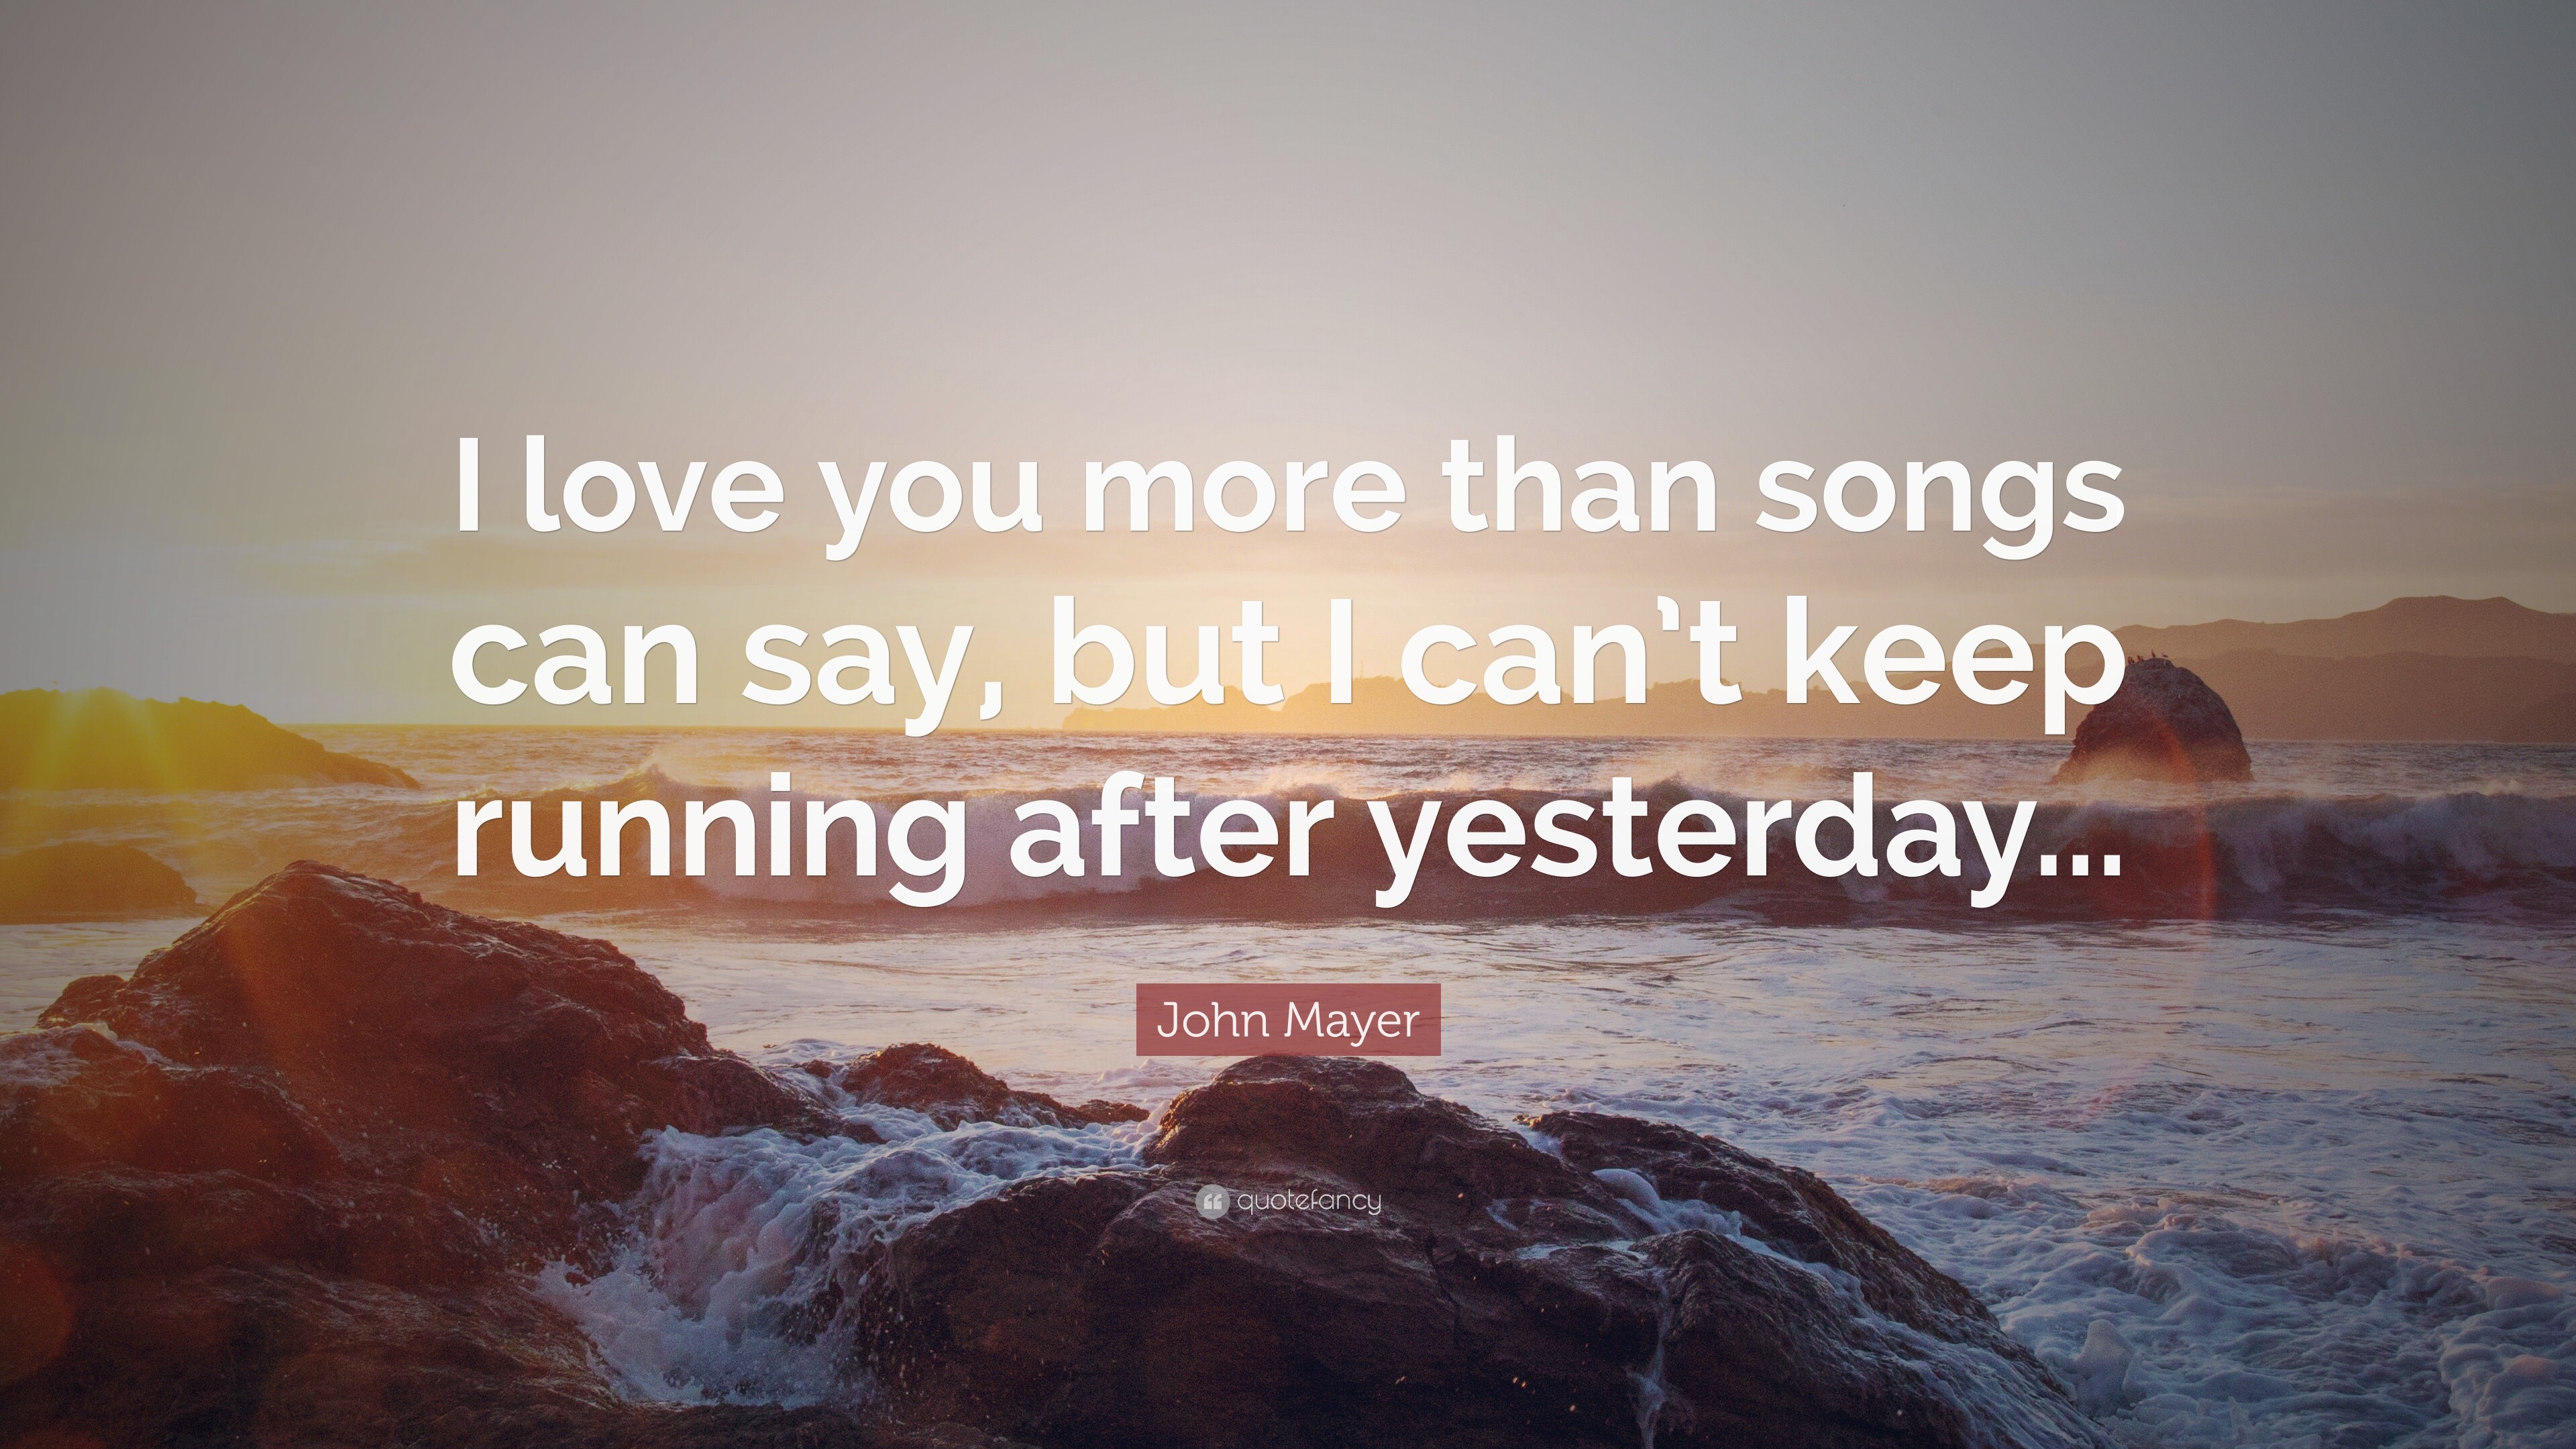 John Mayer Quote I love you more than songs can say but I cant